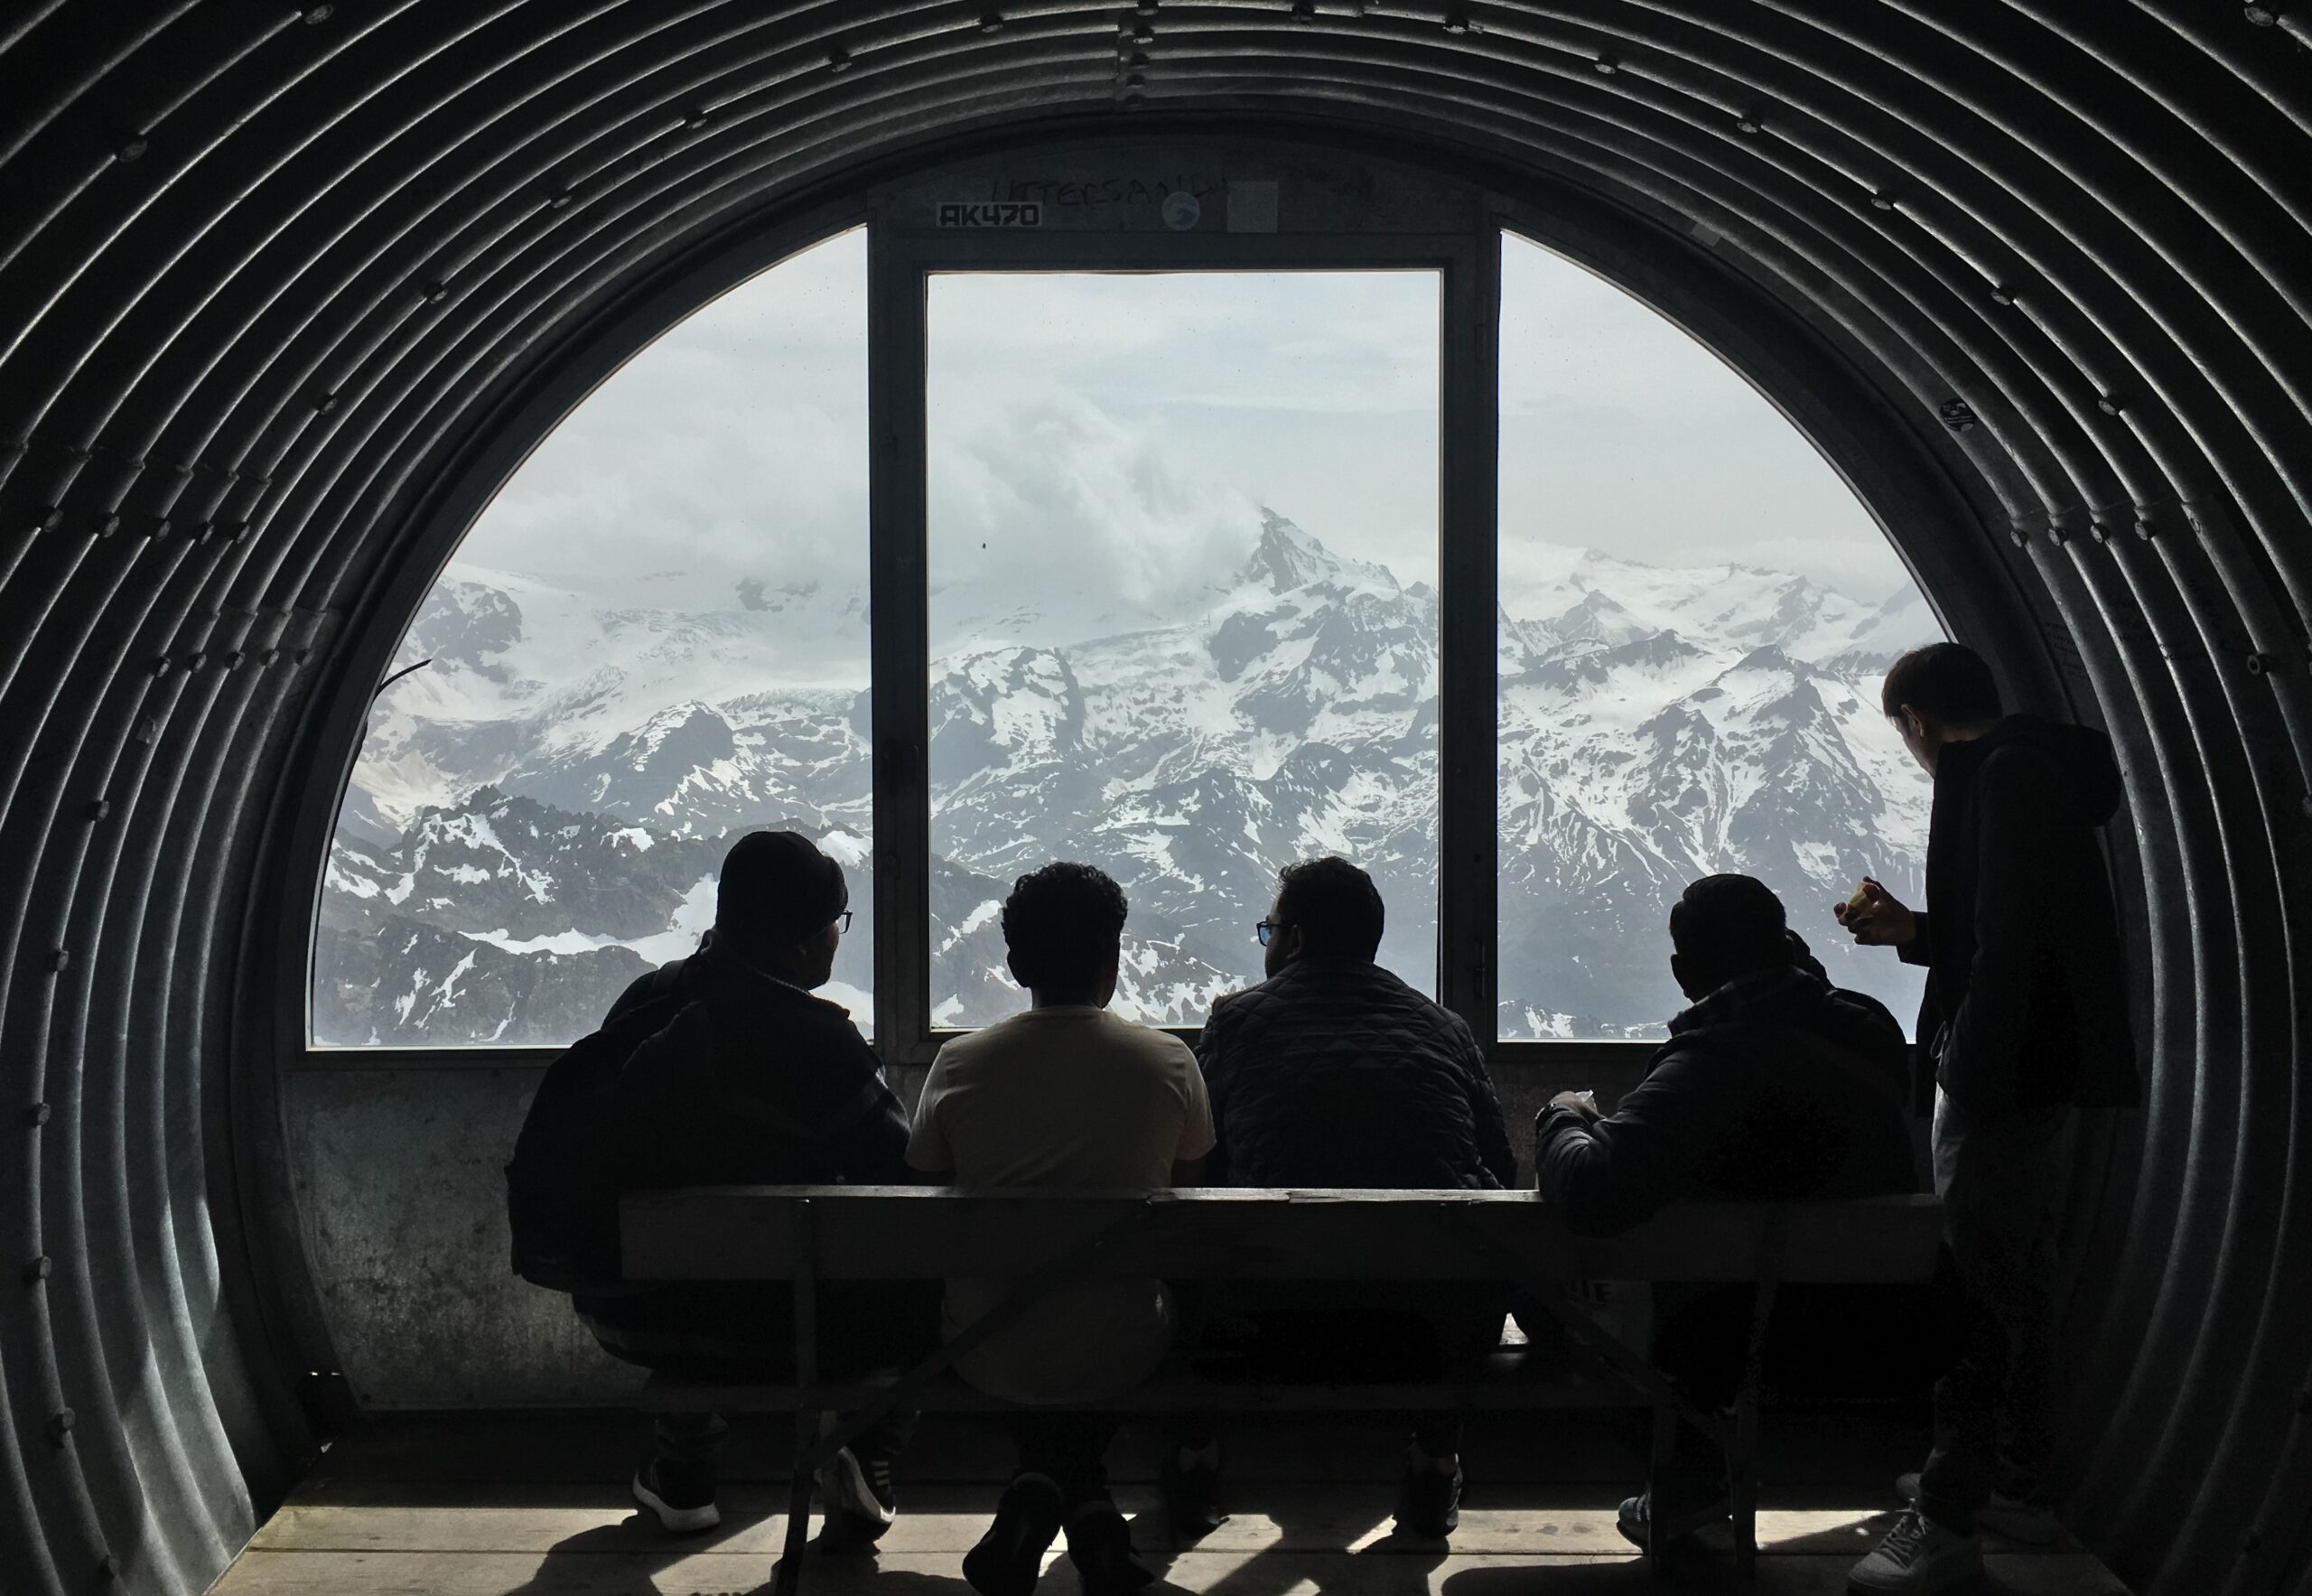 A group of people sit on a bench in front of a circular window overlooking the Swiss Alps